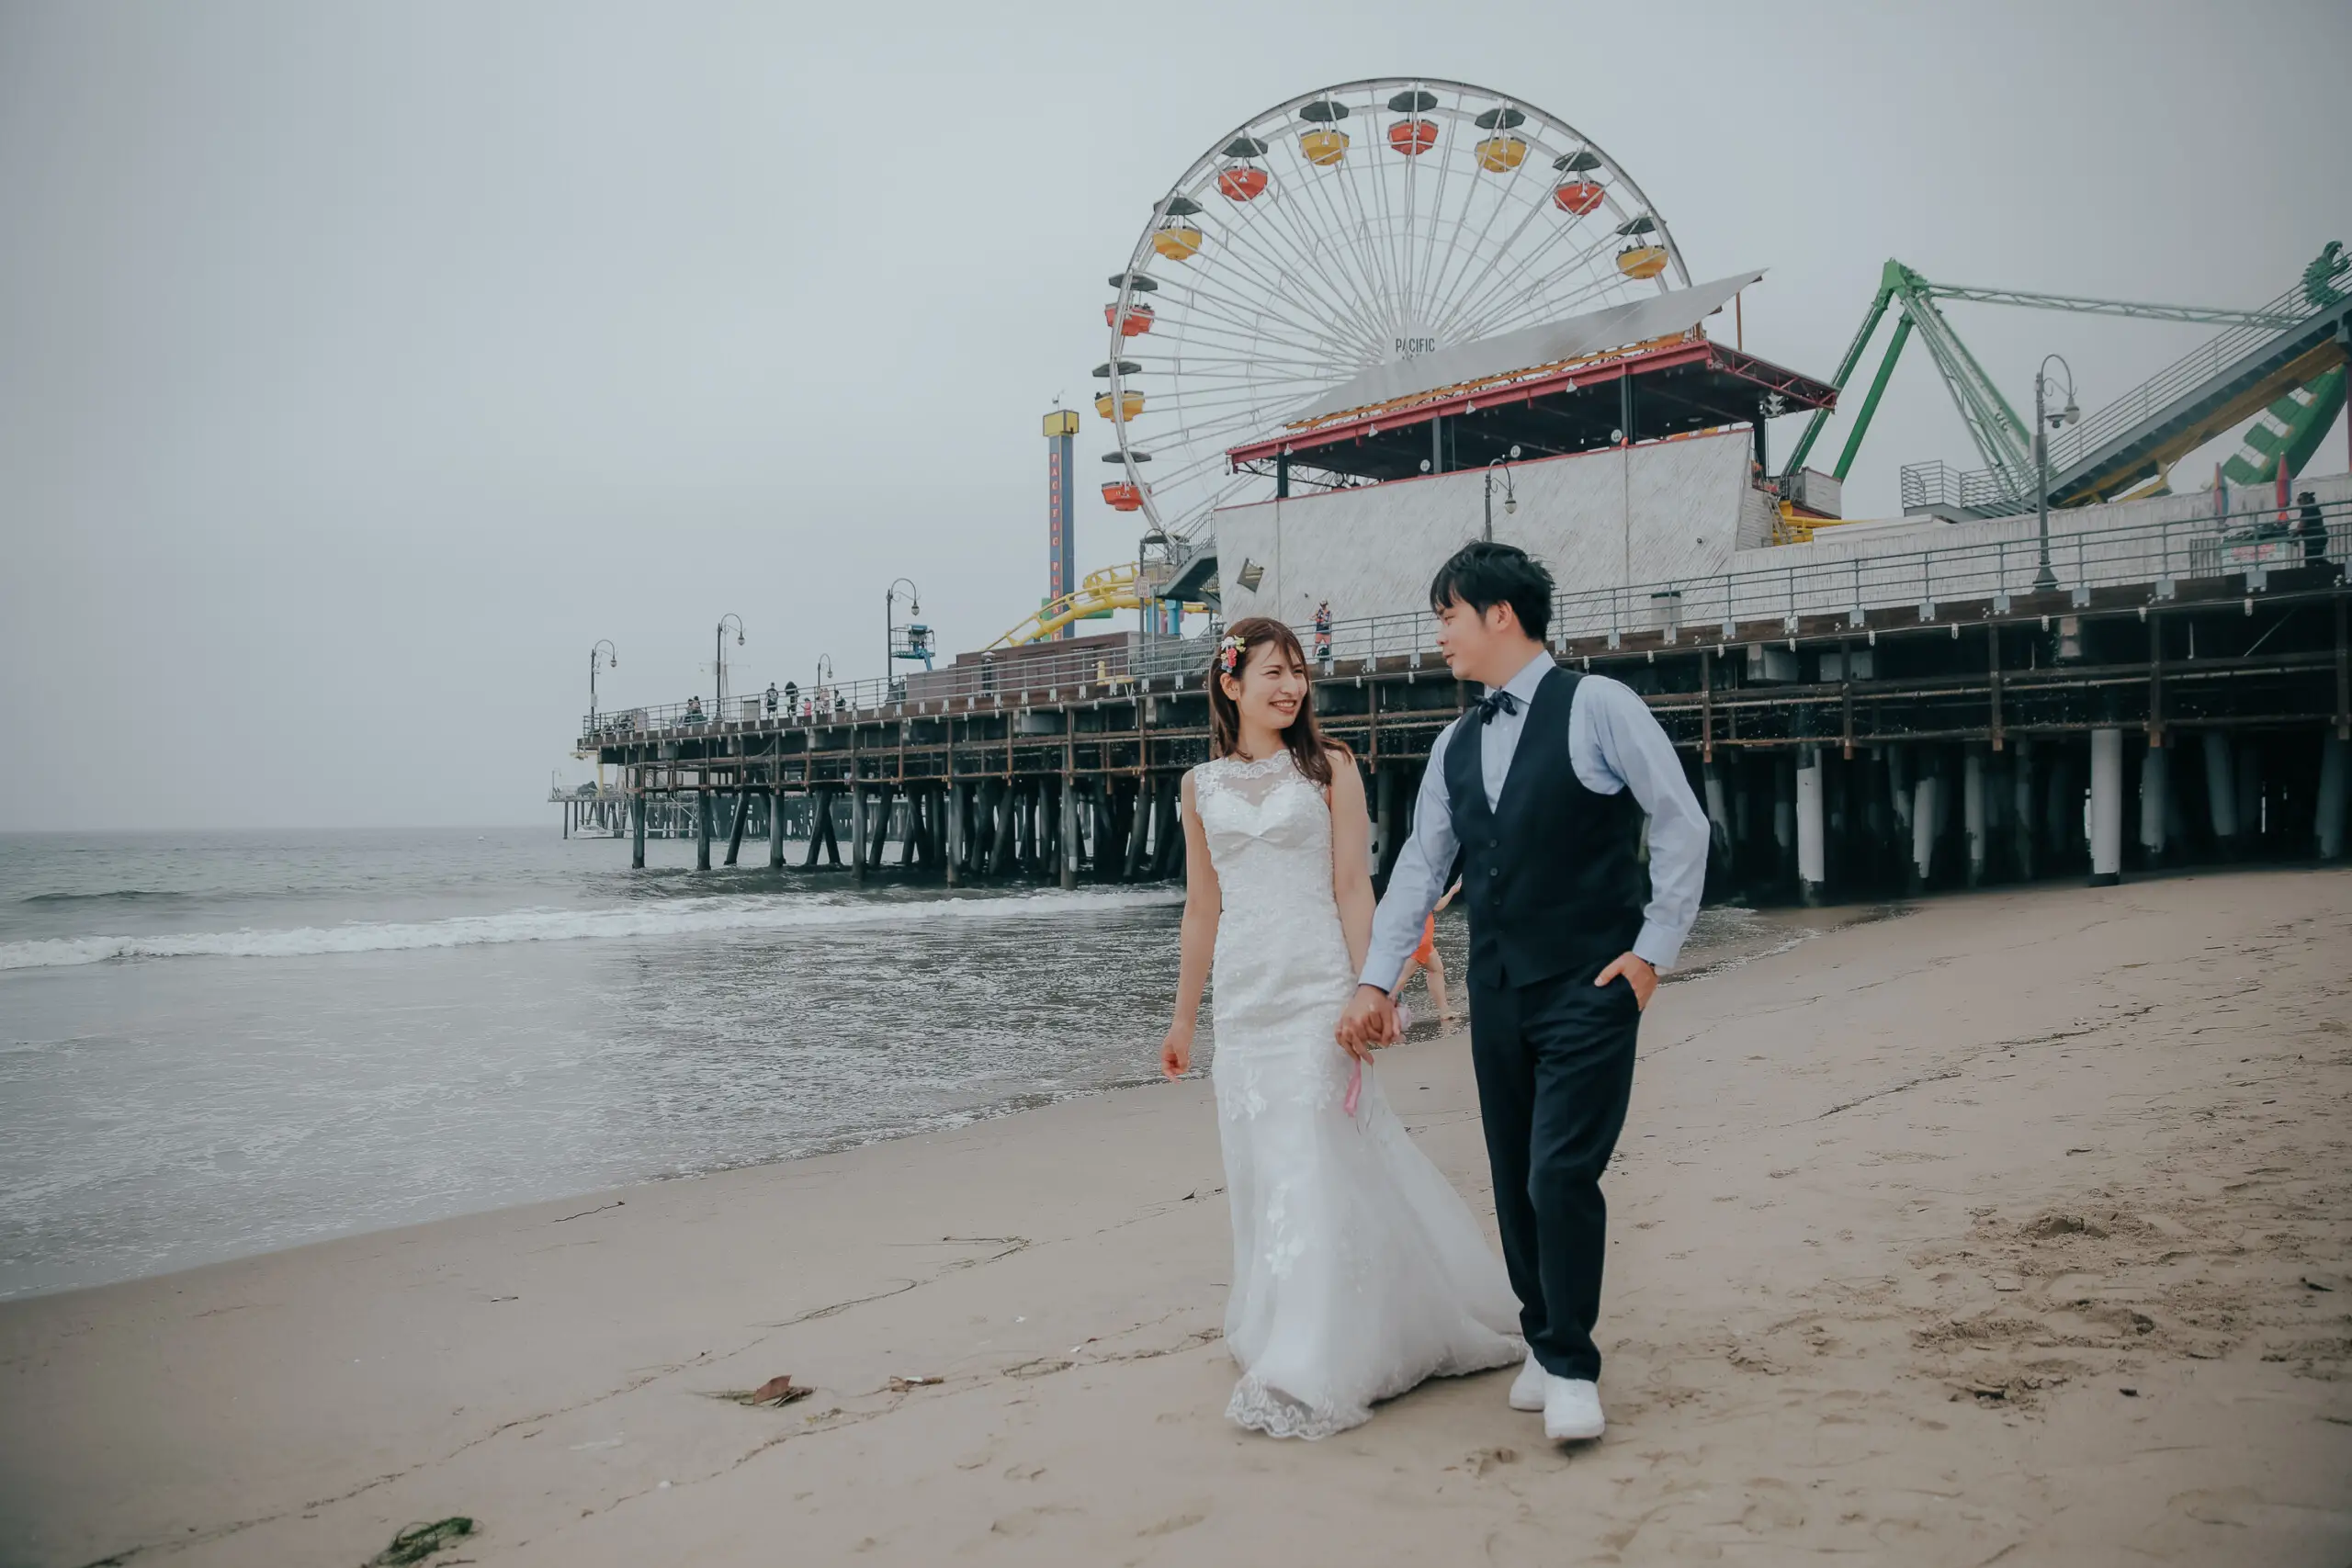 Wedding photoshoot by Ailey, Localgrapher in Los Angeles